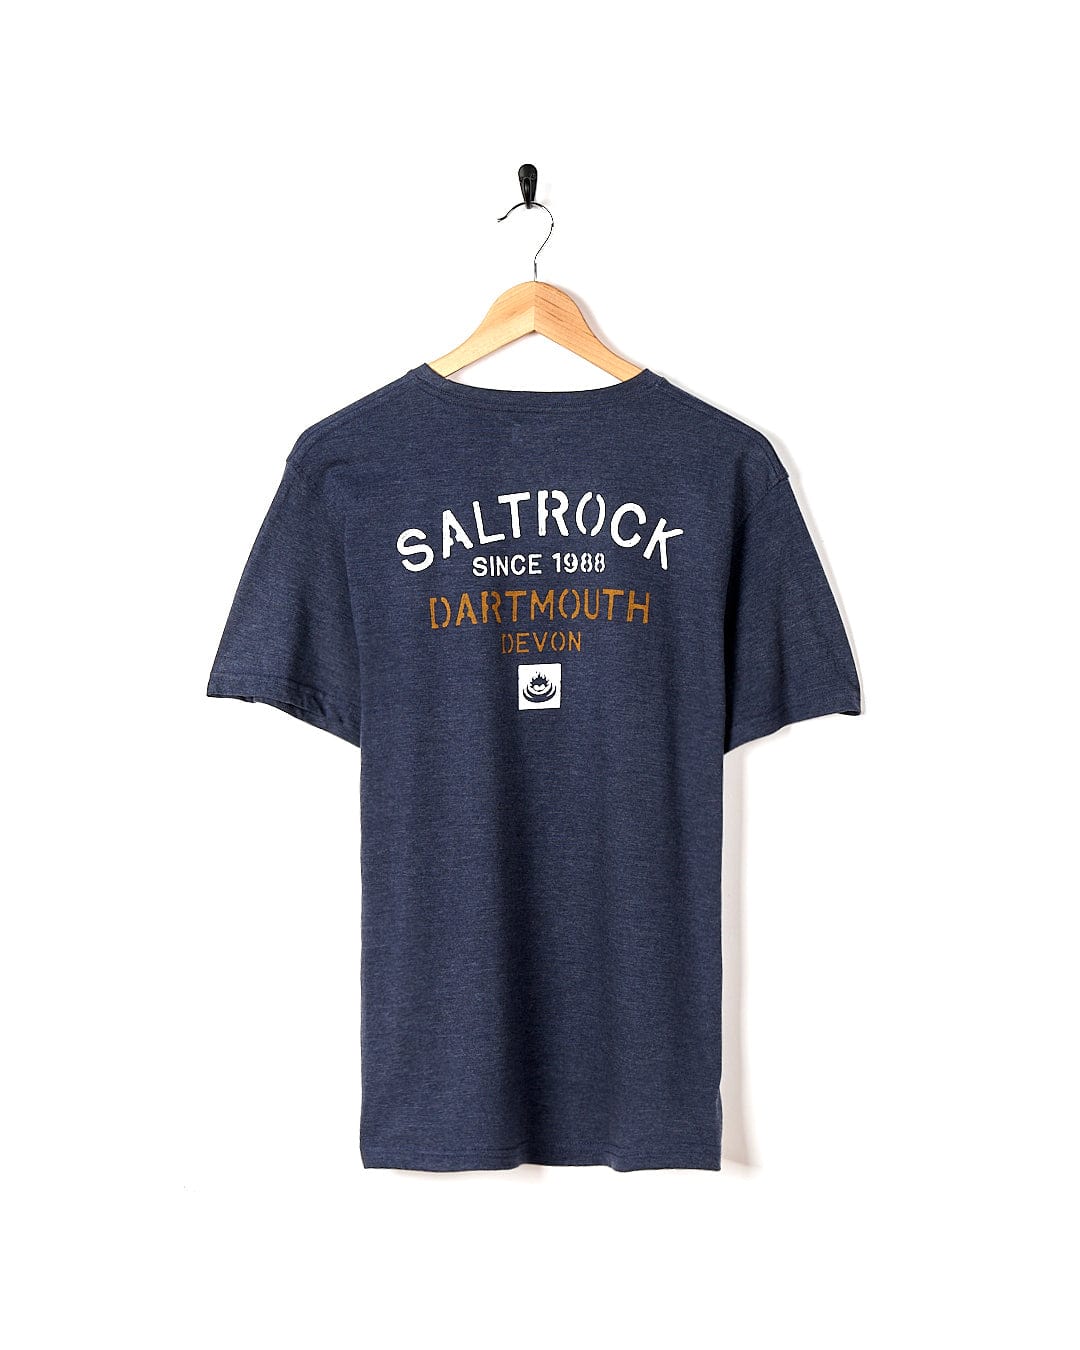 A Stencil - Mens Stencil T-Shirt - Dartmouth - Dress Blue with the brand name Saltrock on it.